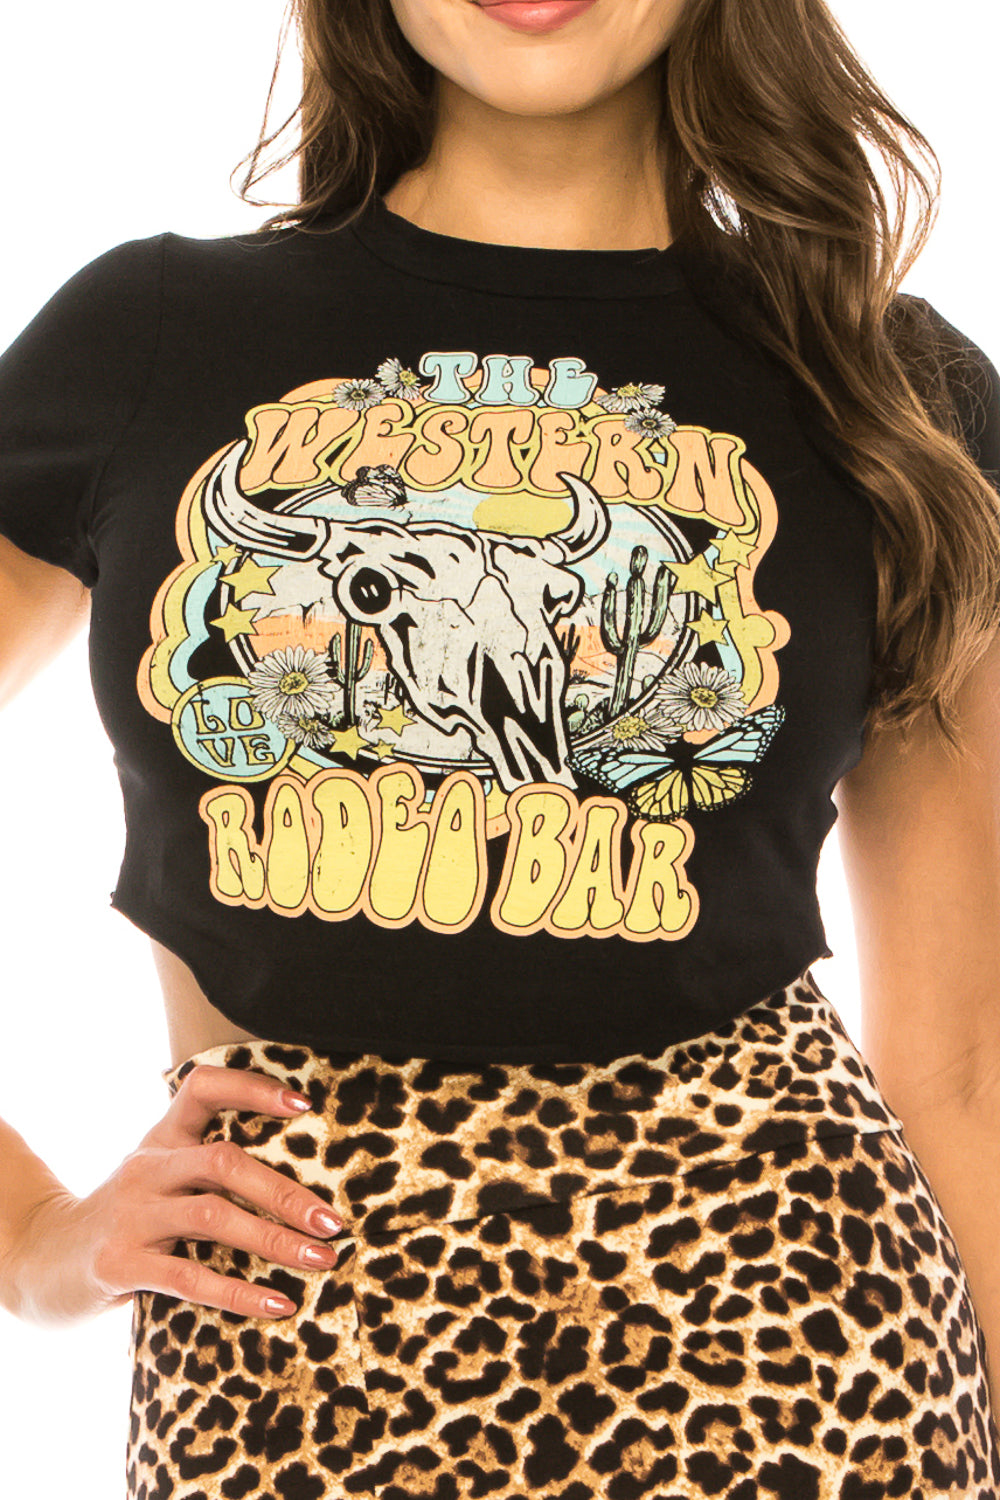 THE WESTERN RODEO BAR CROP TOP - Trailsclothing.com